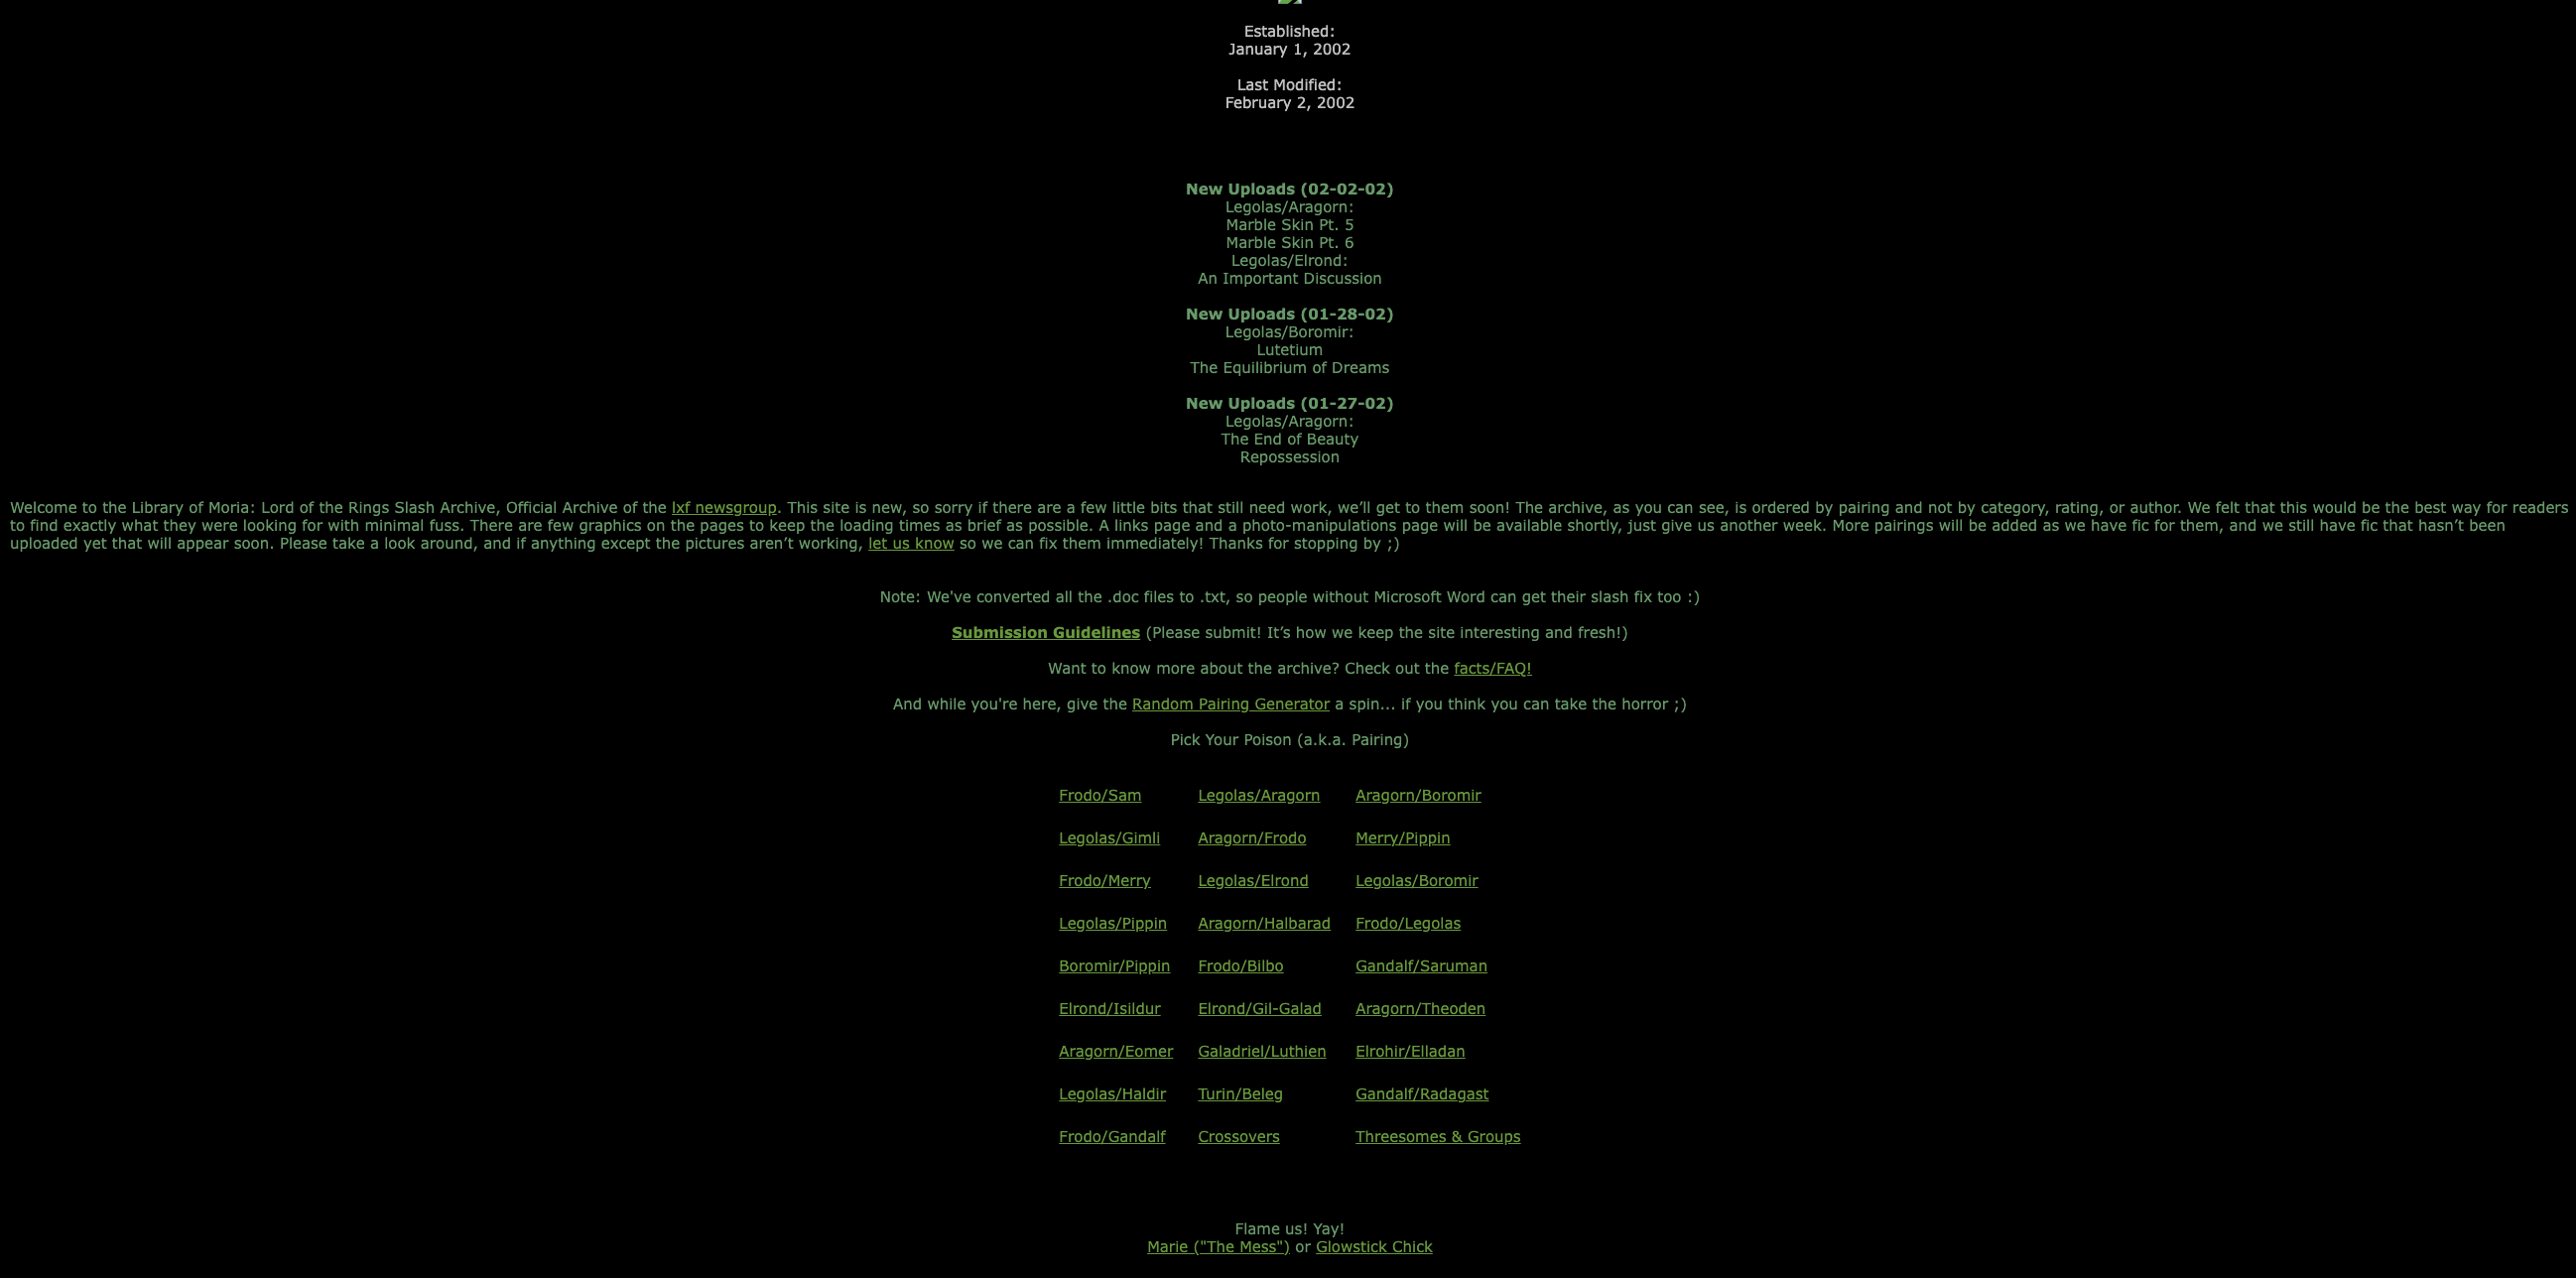 The earliest available capture of the Library of Moria's homepage, from February 3, 2002, shows the pairings list and 'Flame Us! Yay!' already in place